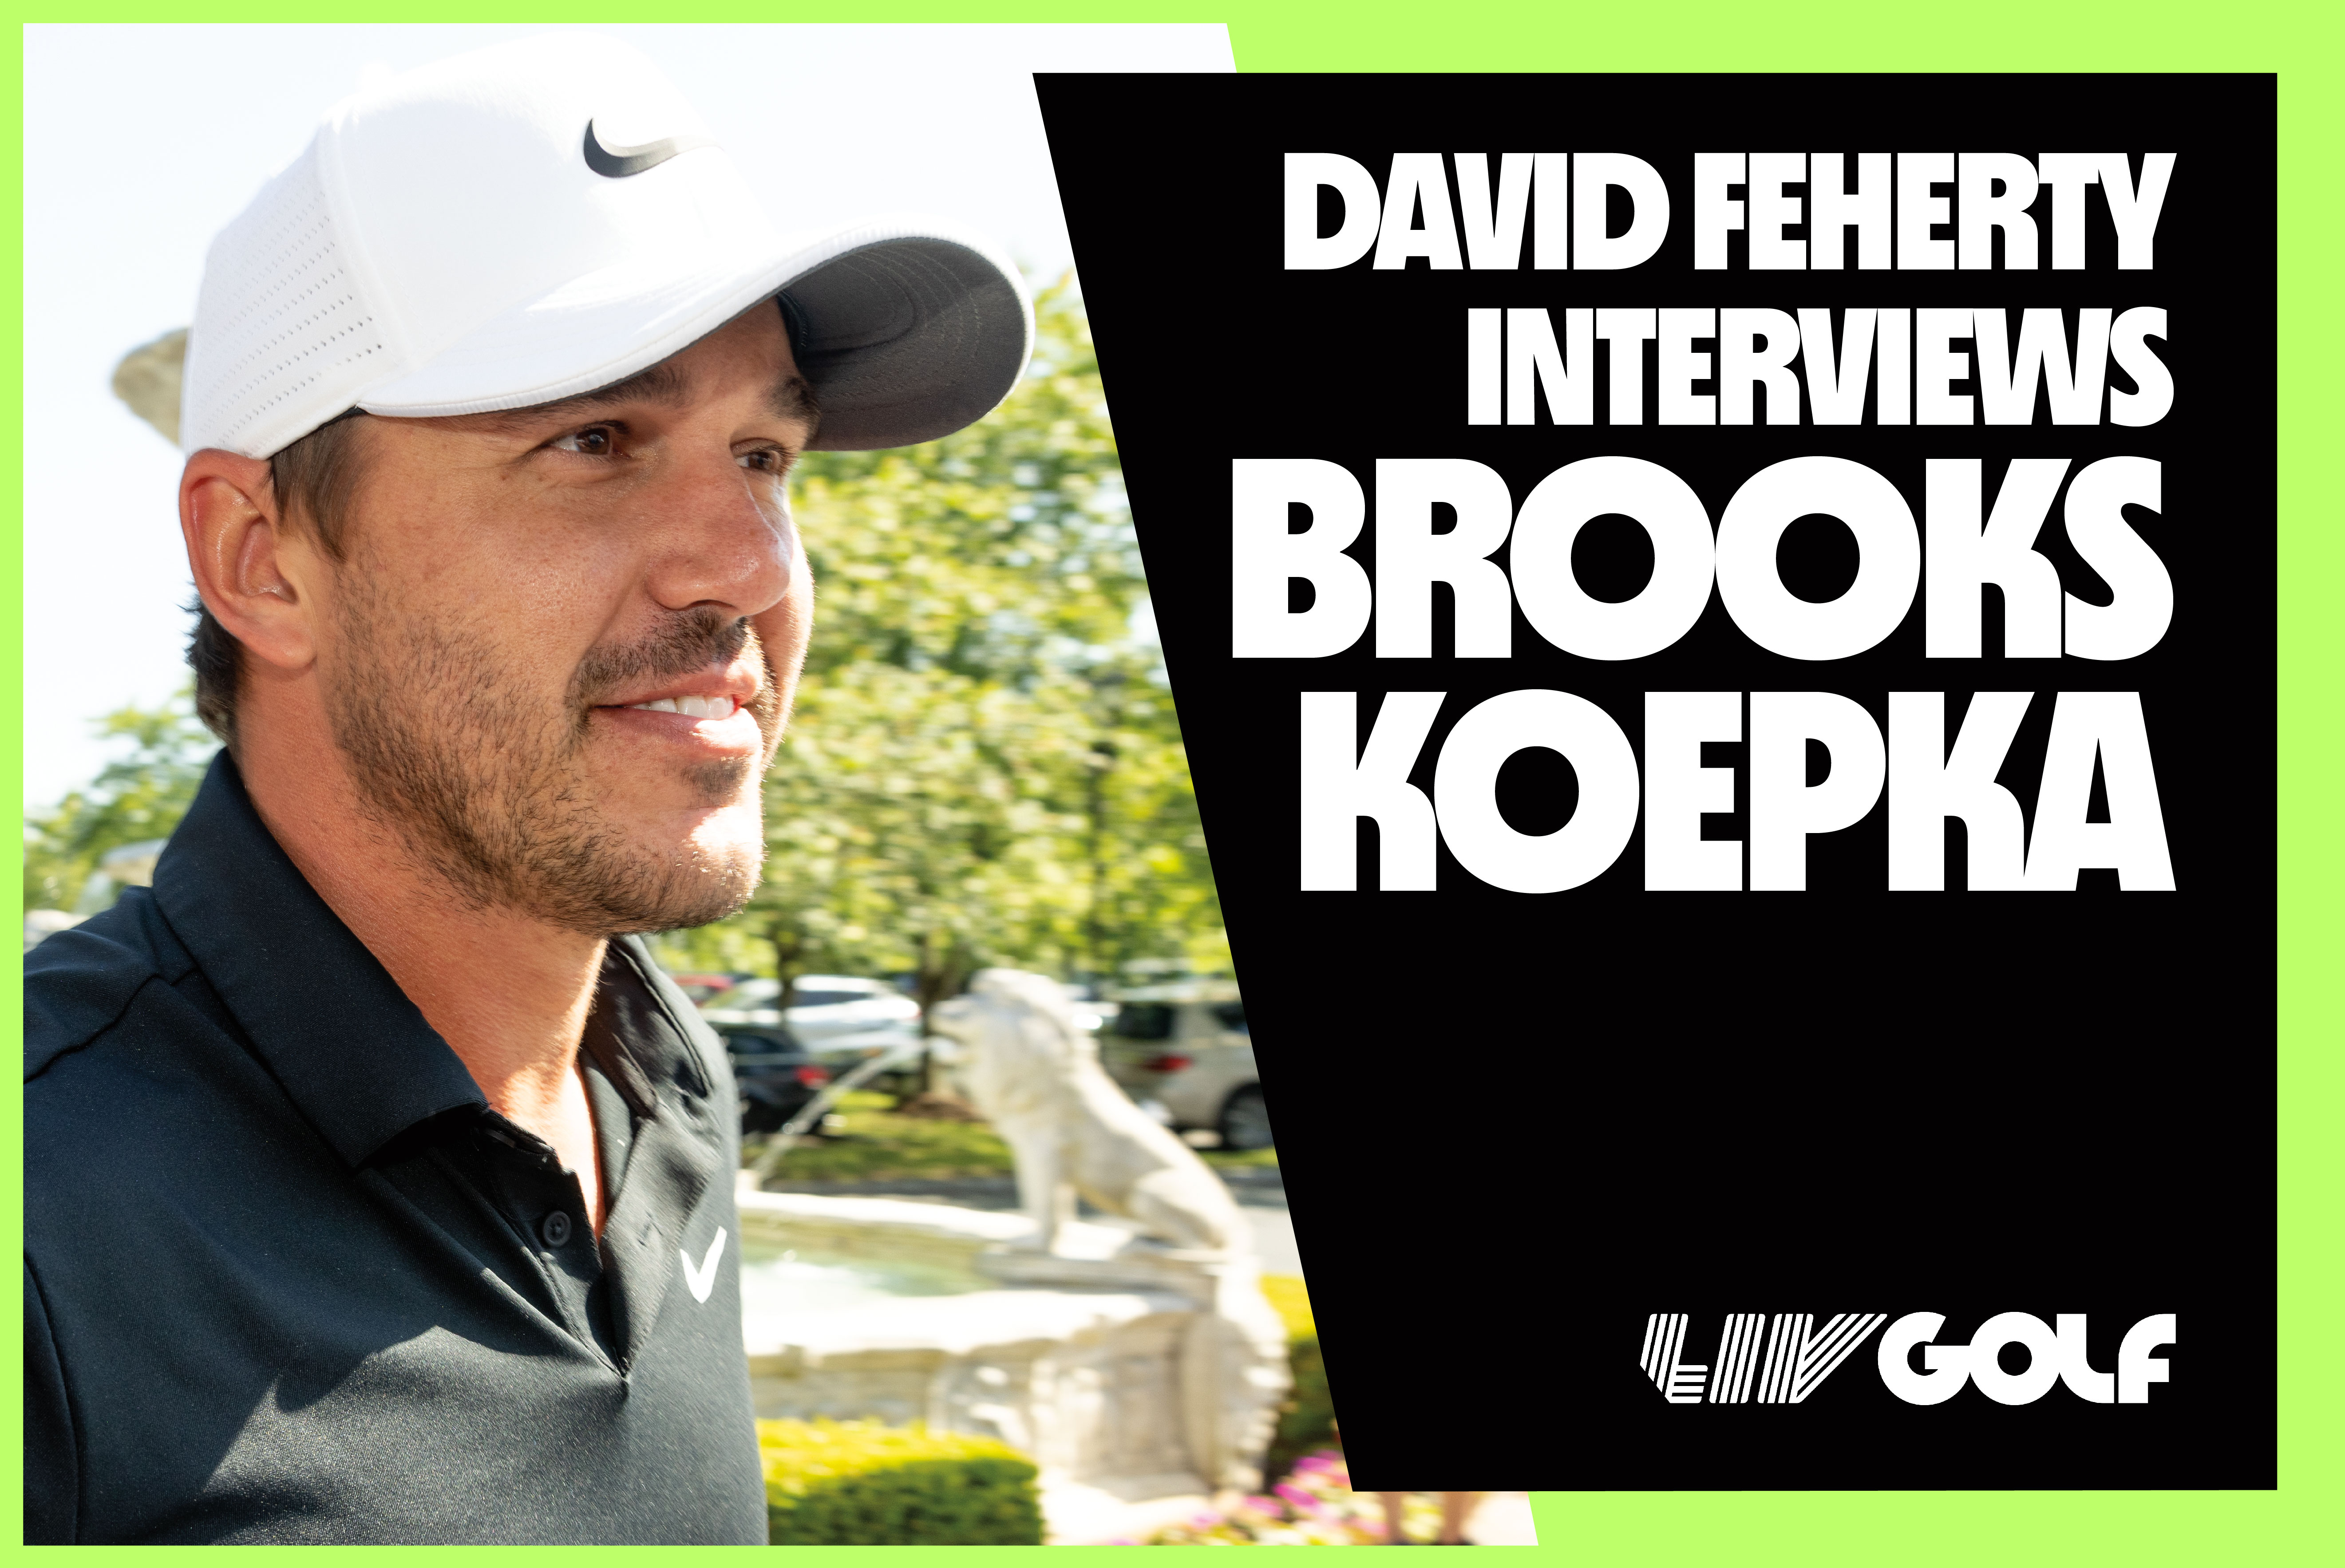 MAJOR CHAMP ONE-ON-ONE: KOEPKA SITS DOWN WITH FEHERTY